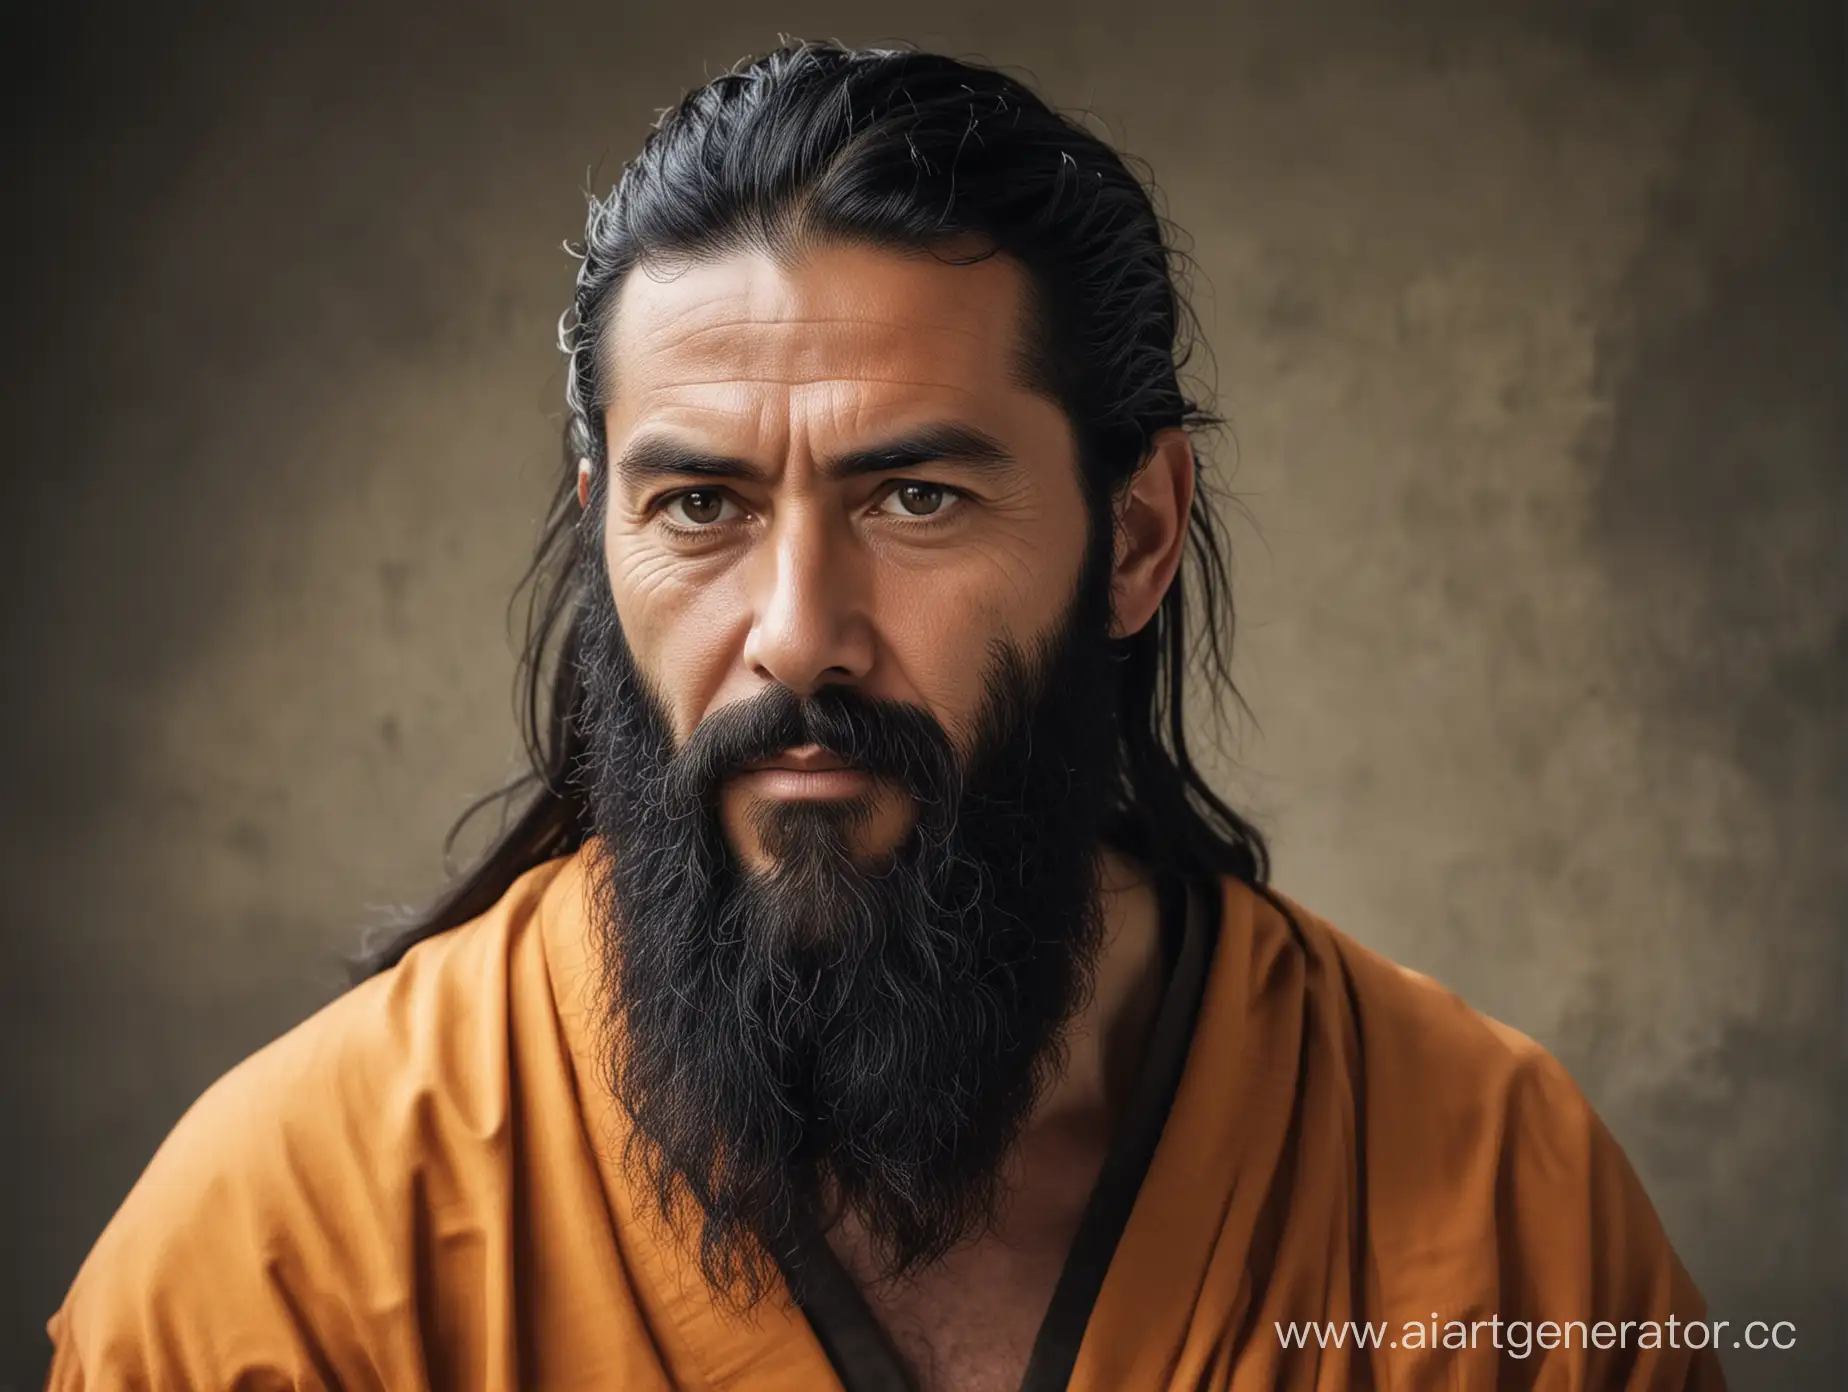 Mature-Warrior-Monk-with-Black-Beard-and-Long-Hair